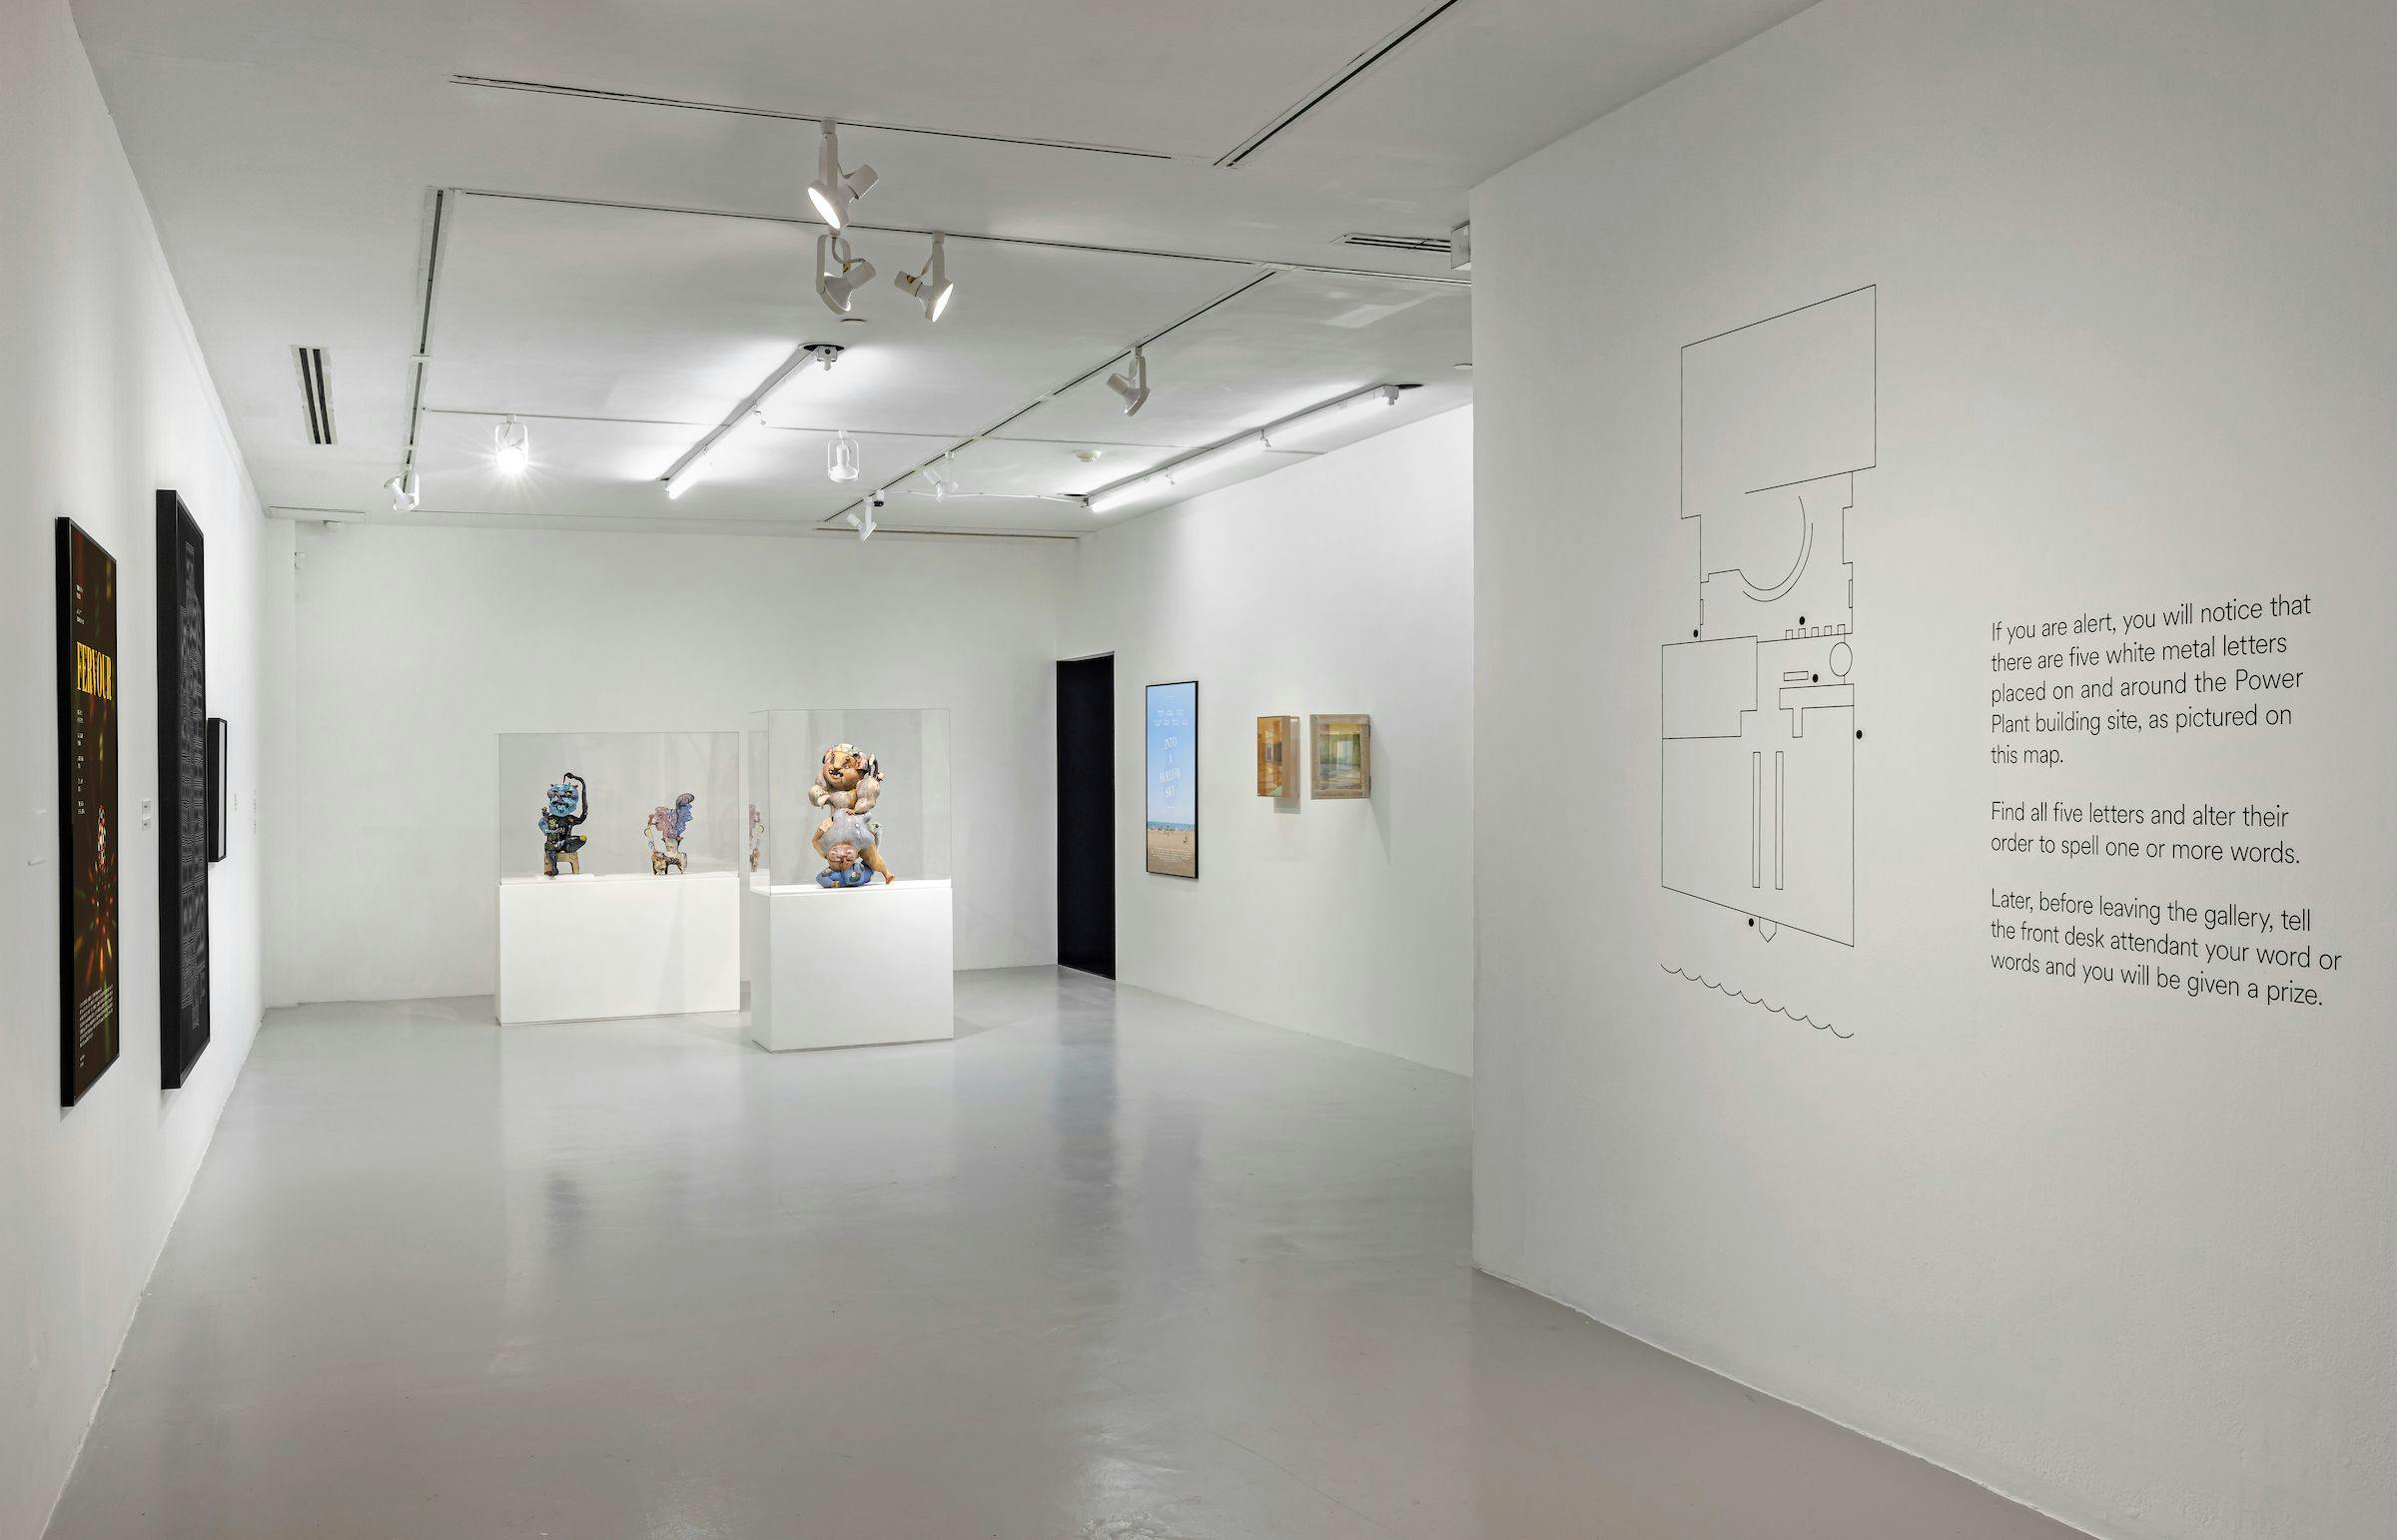 in parallel with works by Ella Gonzales, Micah Lexier, Erdem Taşdelen, Sami Tsang, and Shaheer Zazai. Installation view: The Power Plant, Toronto, 2023. Photo: Toni Hafkenscheid.